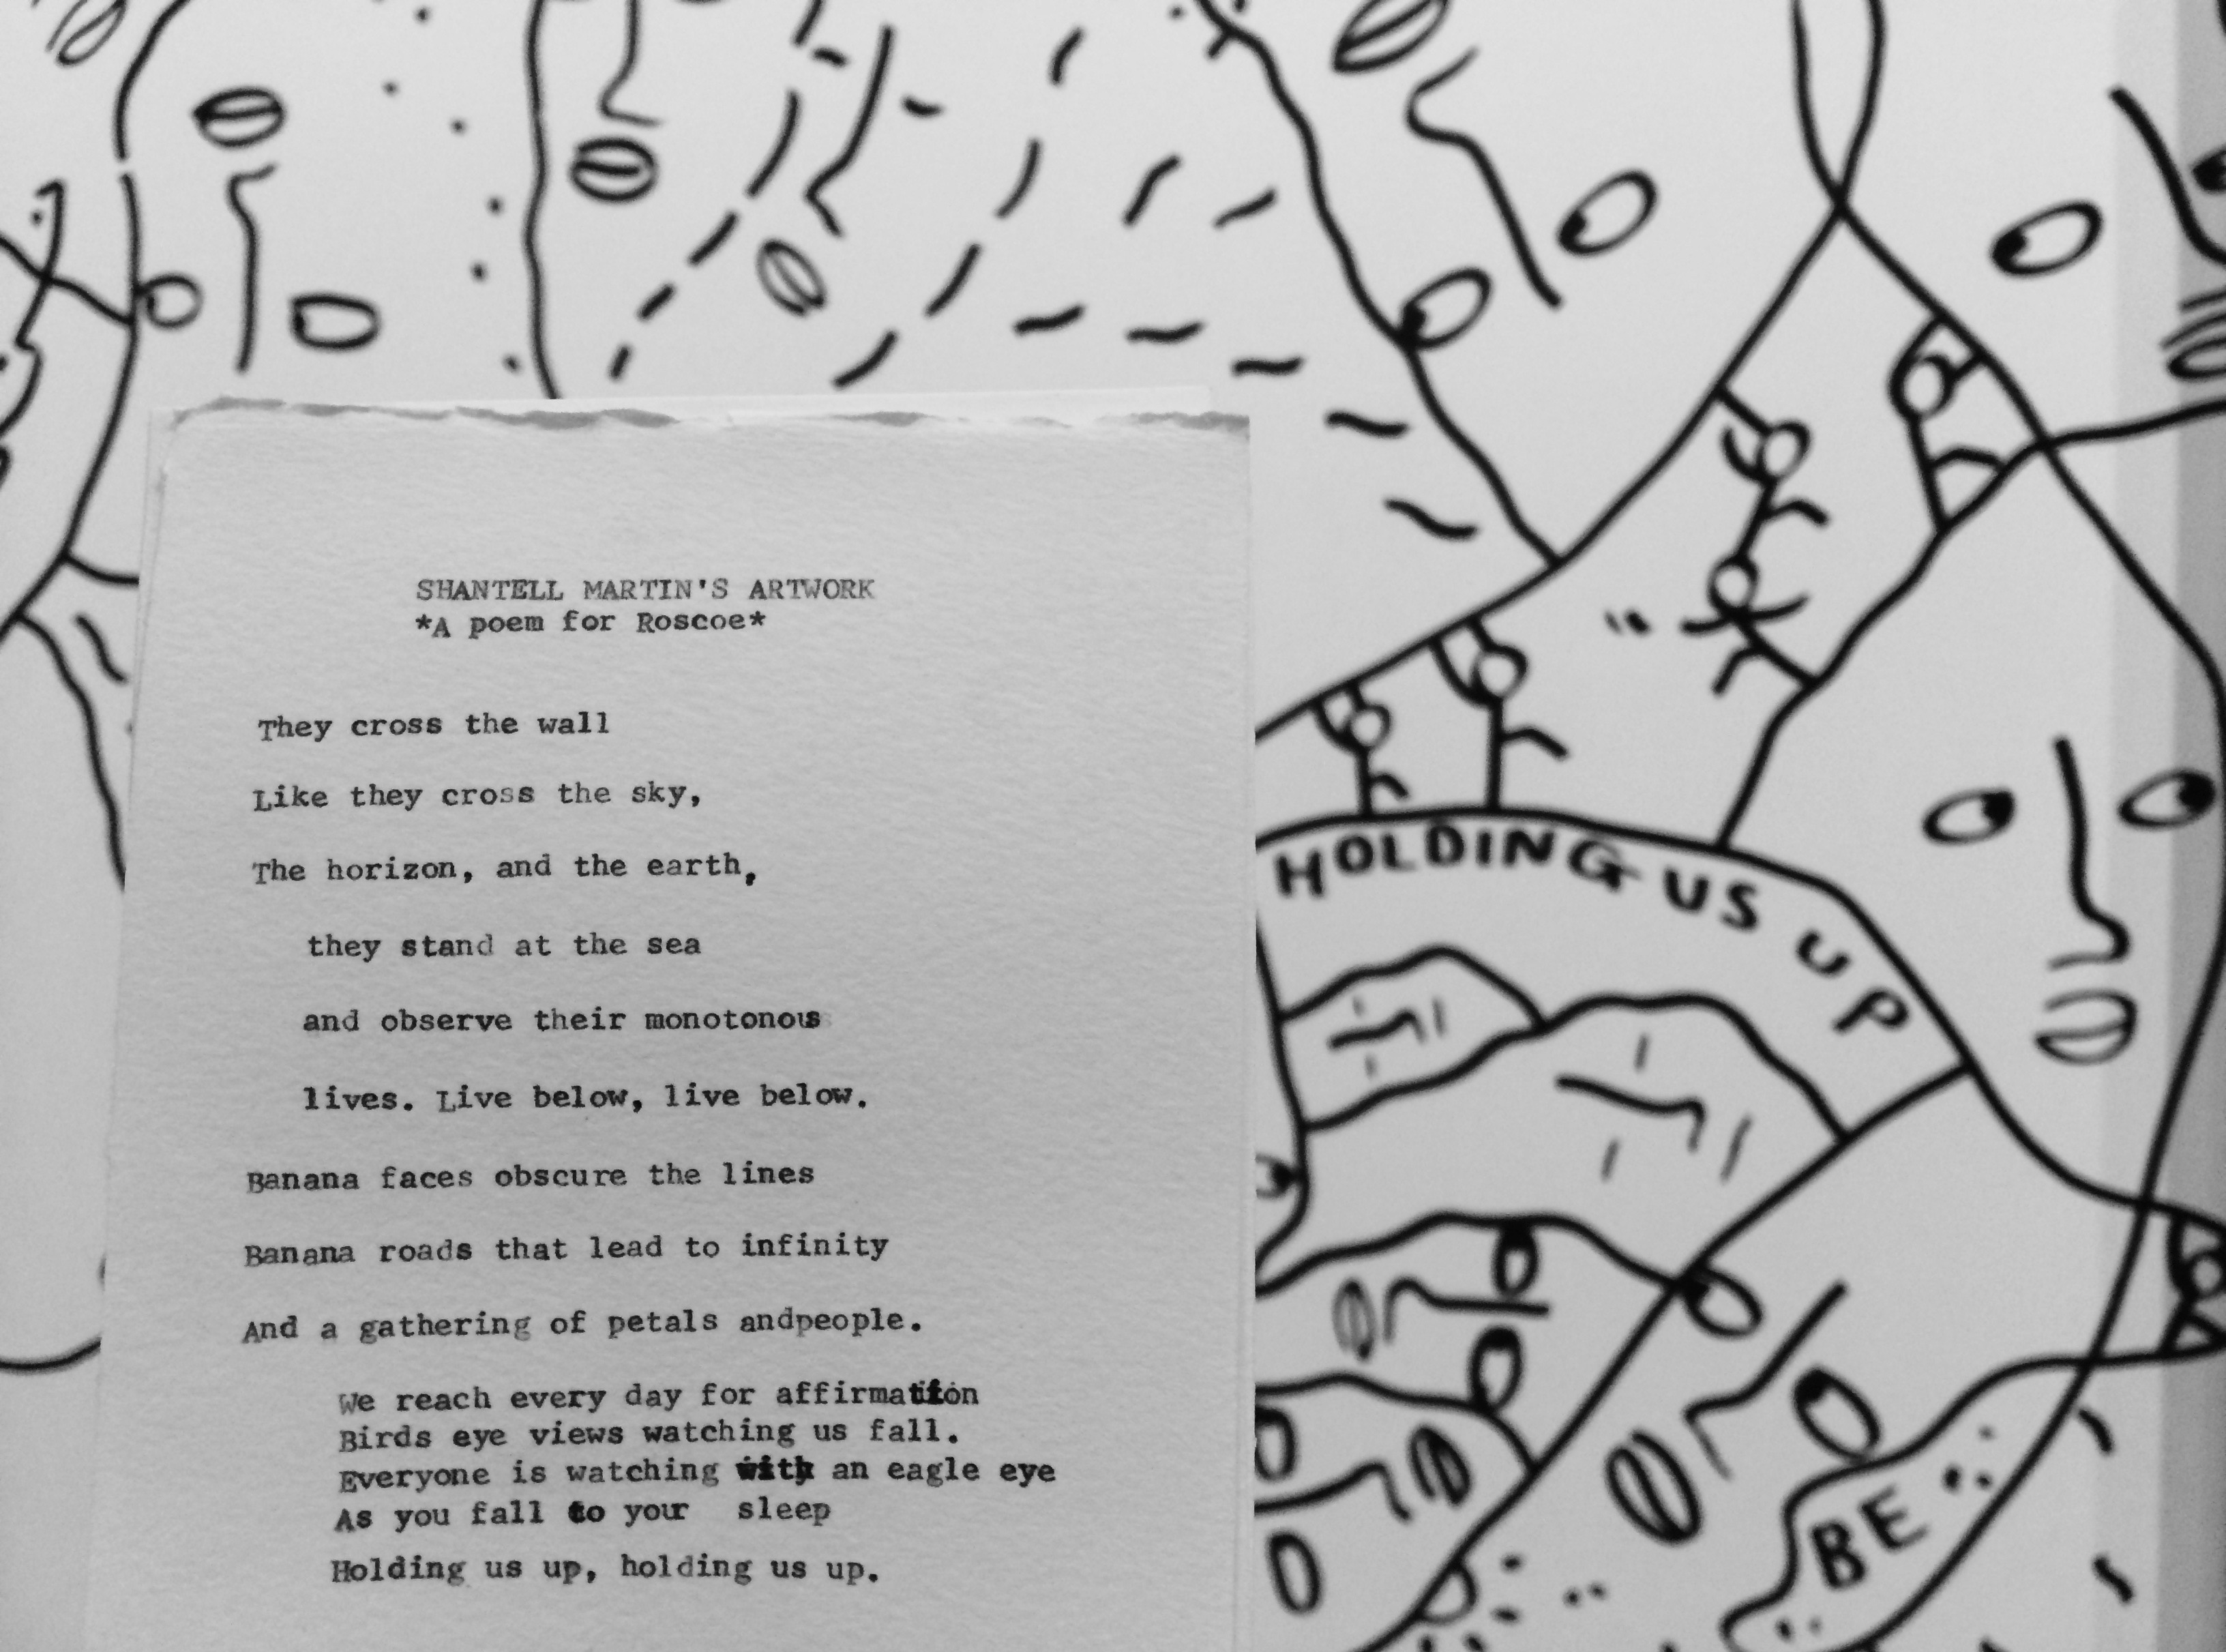 Tyepwritten poem: "A poem for Roscoe" seen over the background of a wall illustrated in black and white cartoon faces